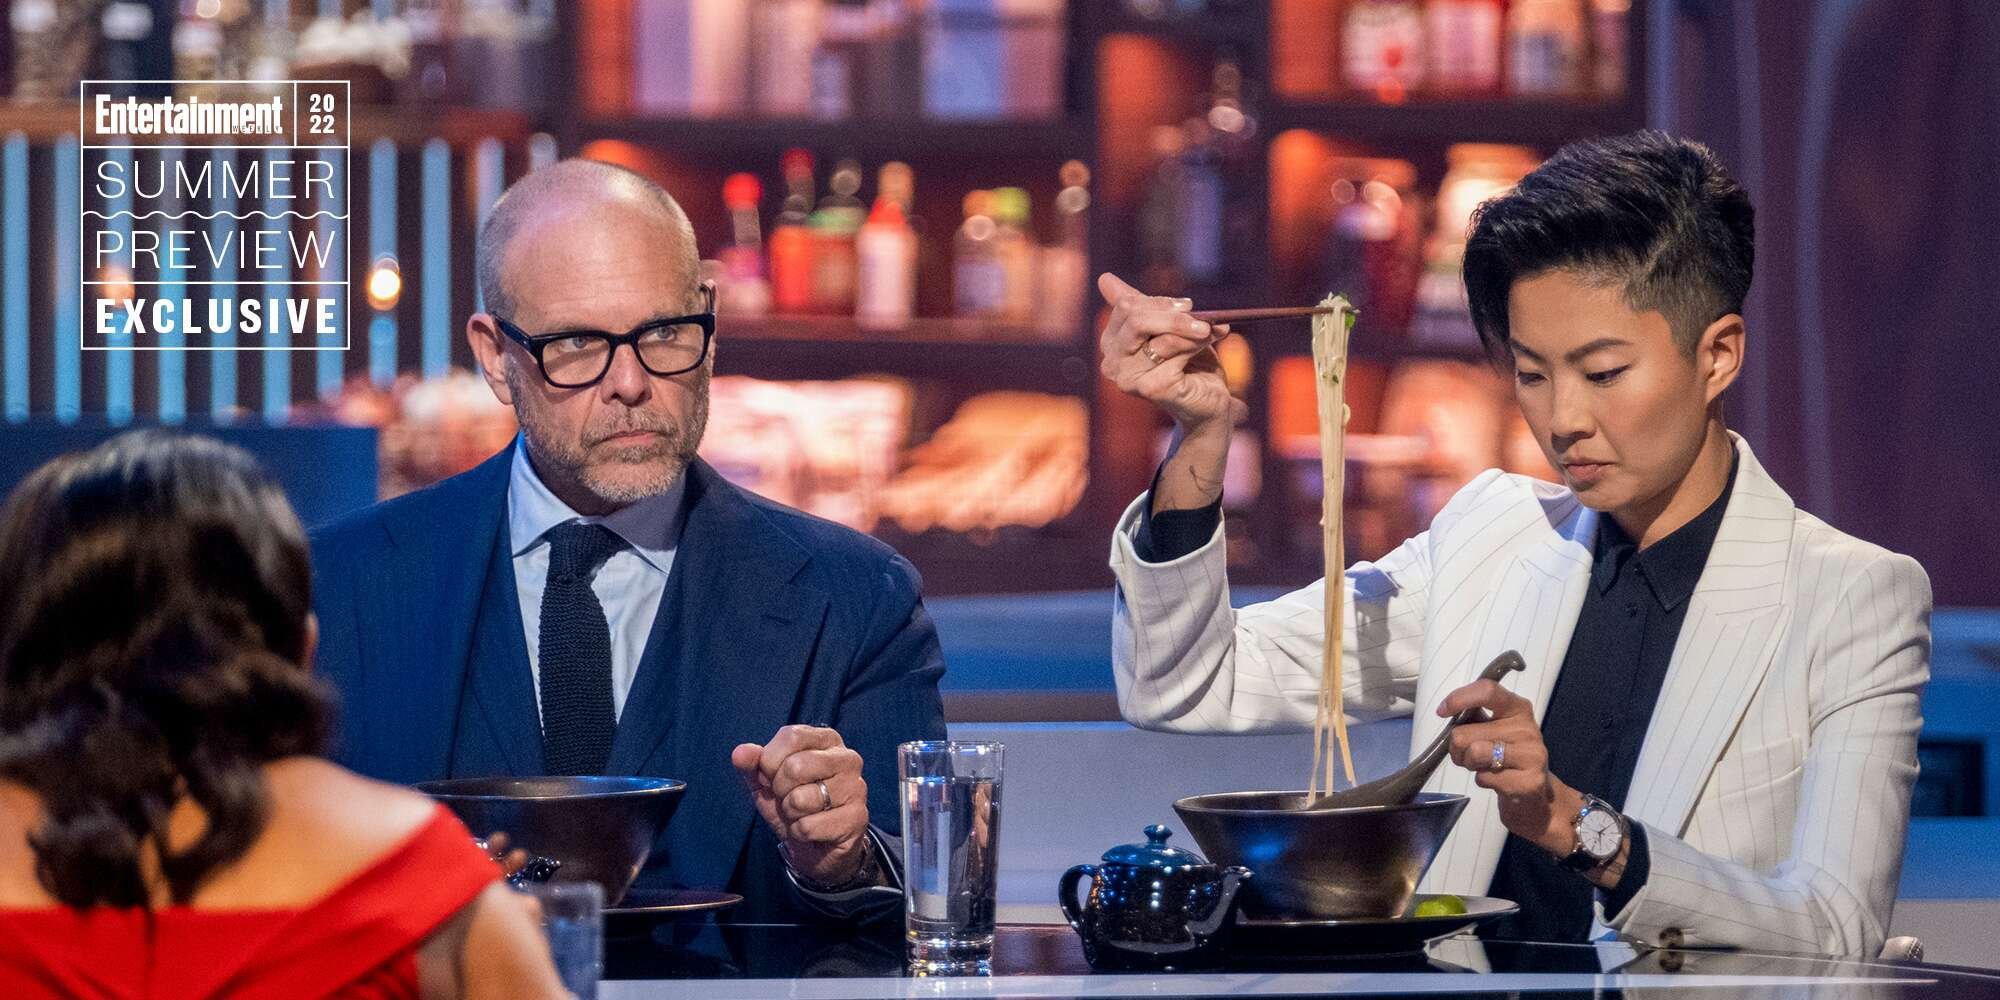 Alton Brown reveals why he left Food Network for Netflix's new Iron Chef series